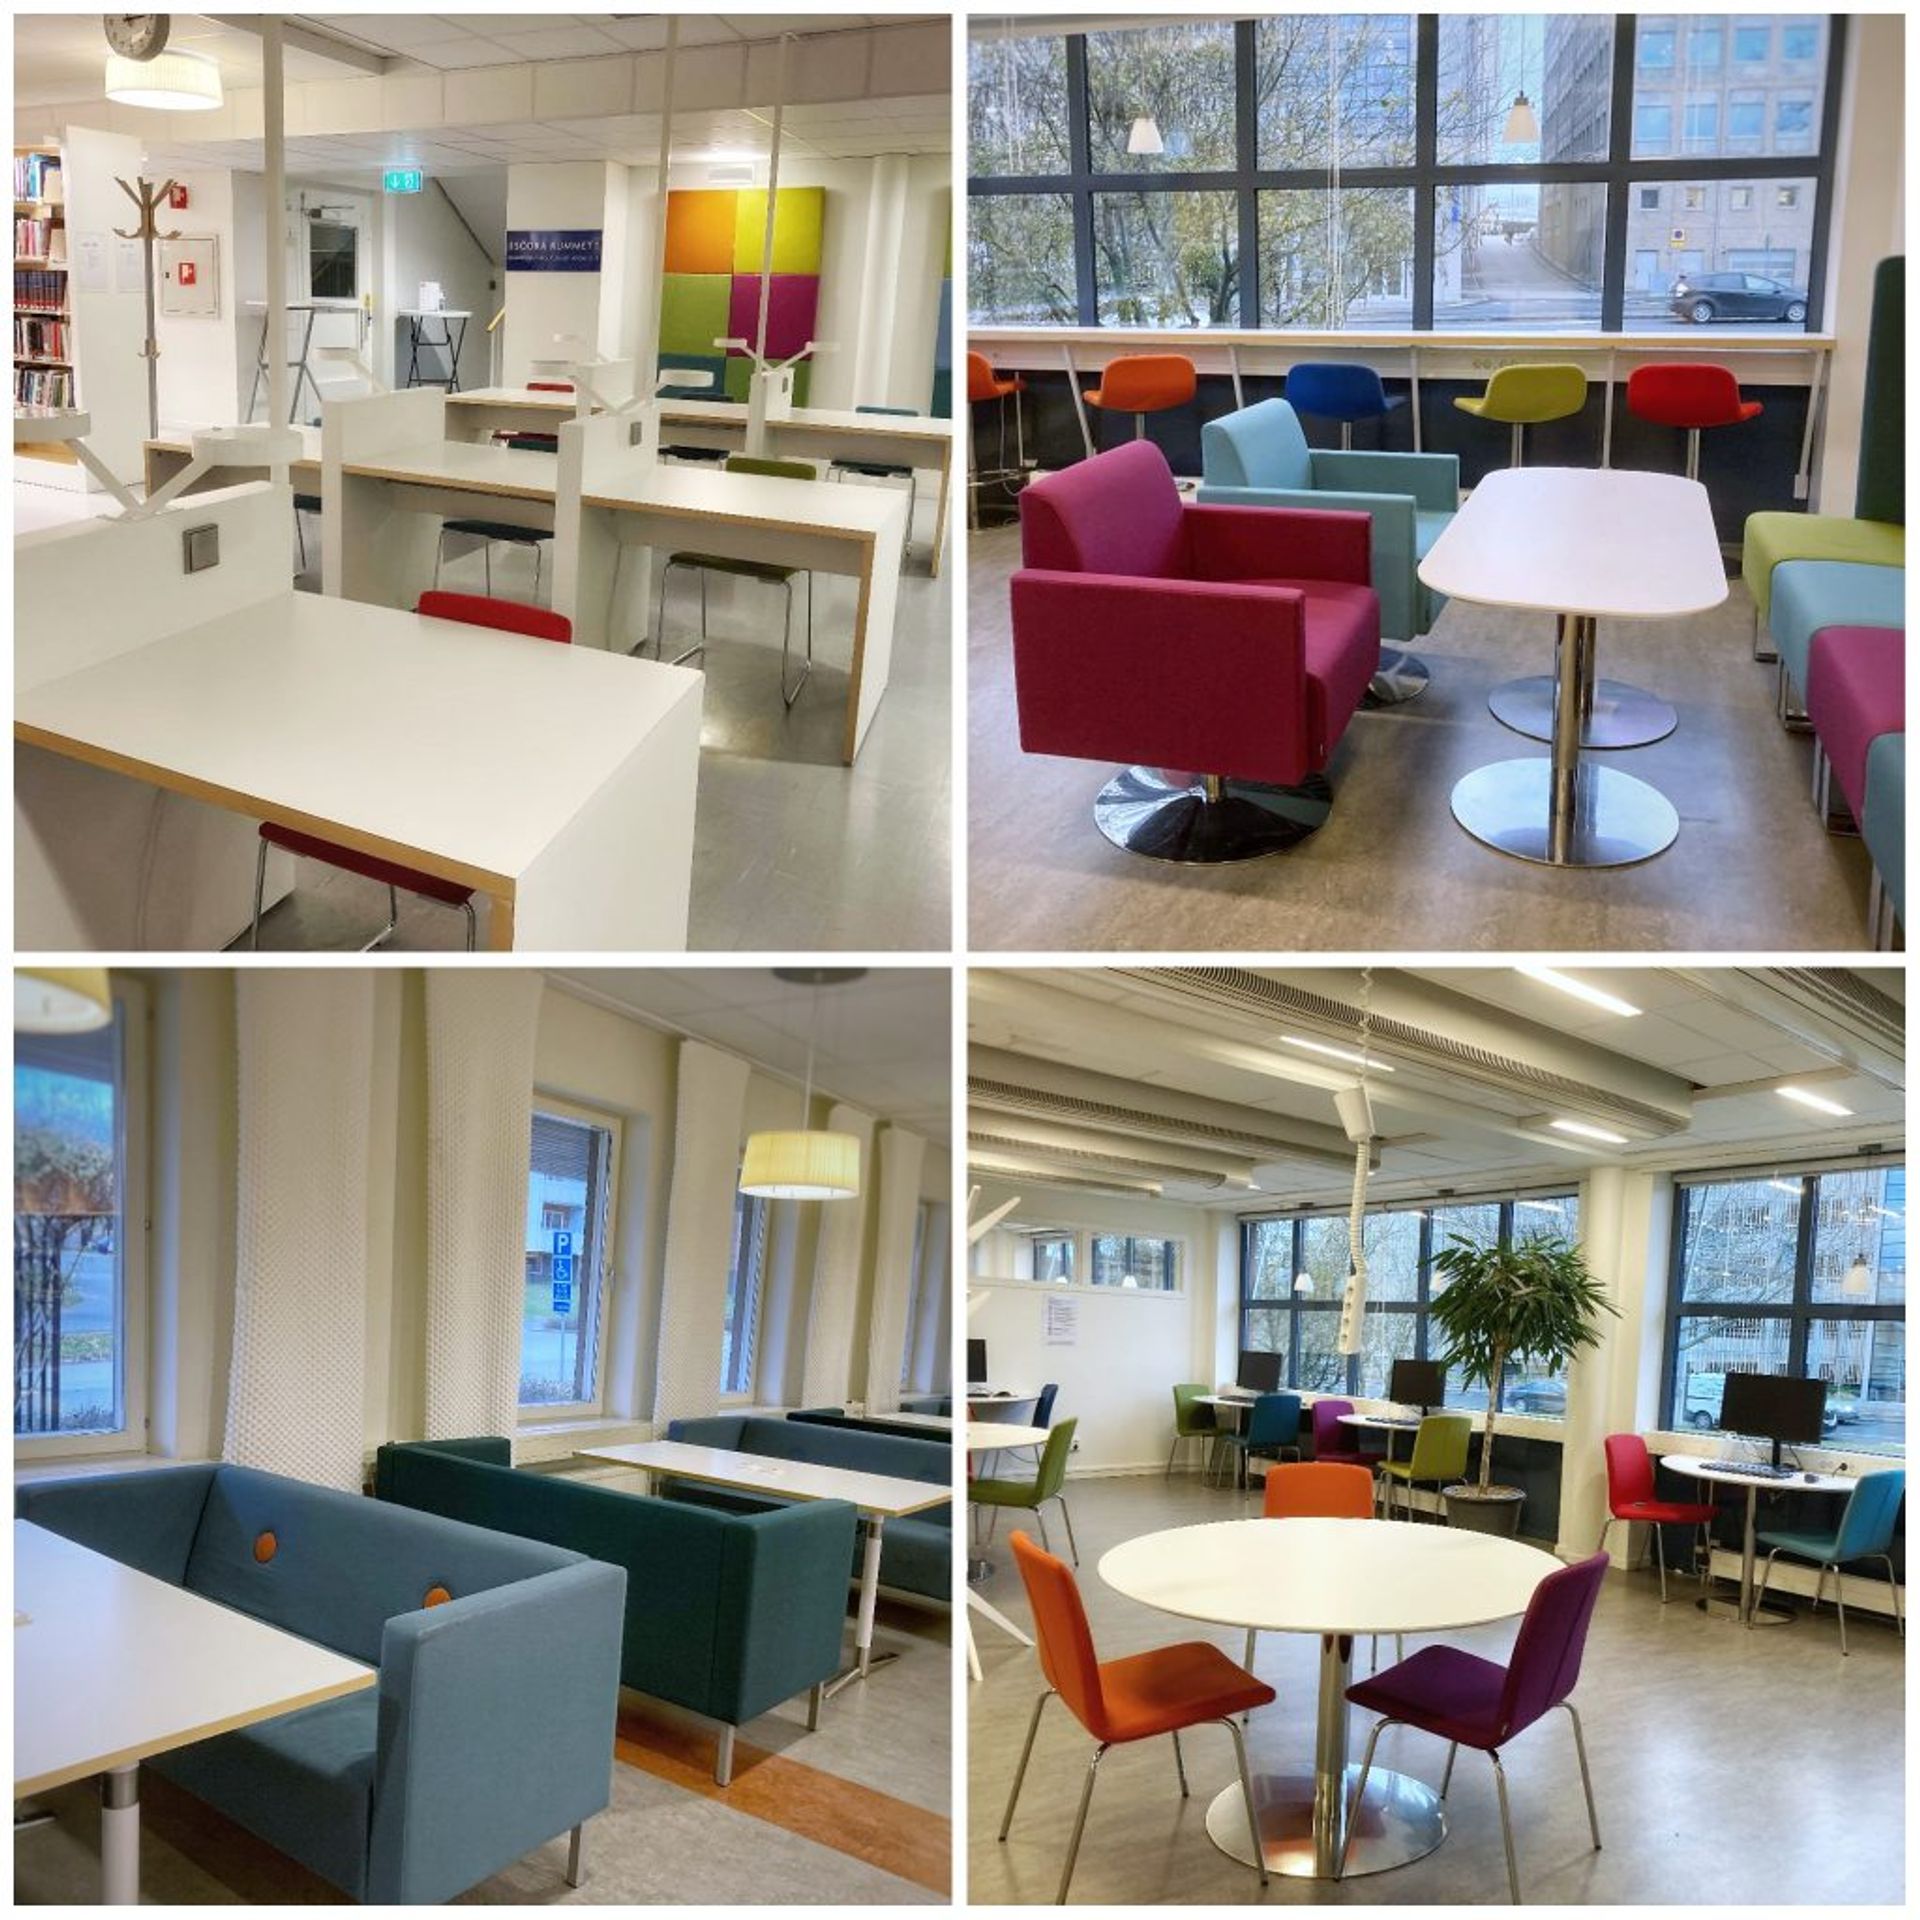 4 photos in a collage showing different study spots with sofas and tables. 